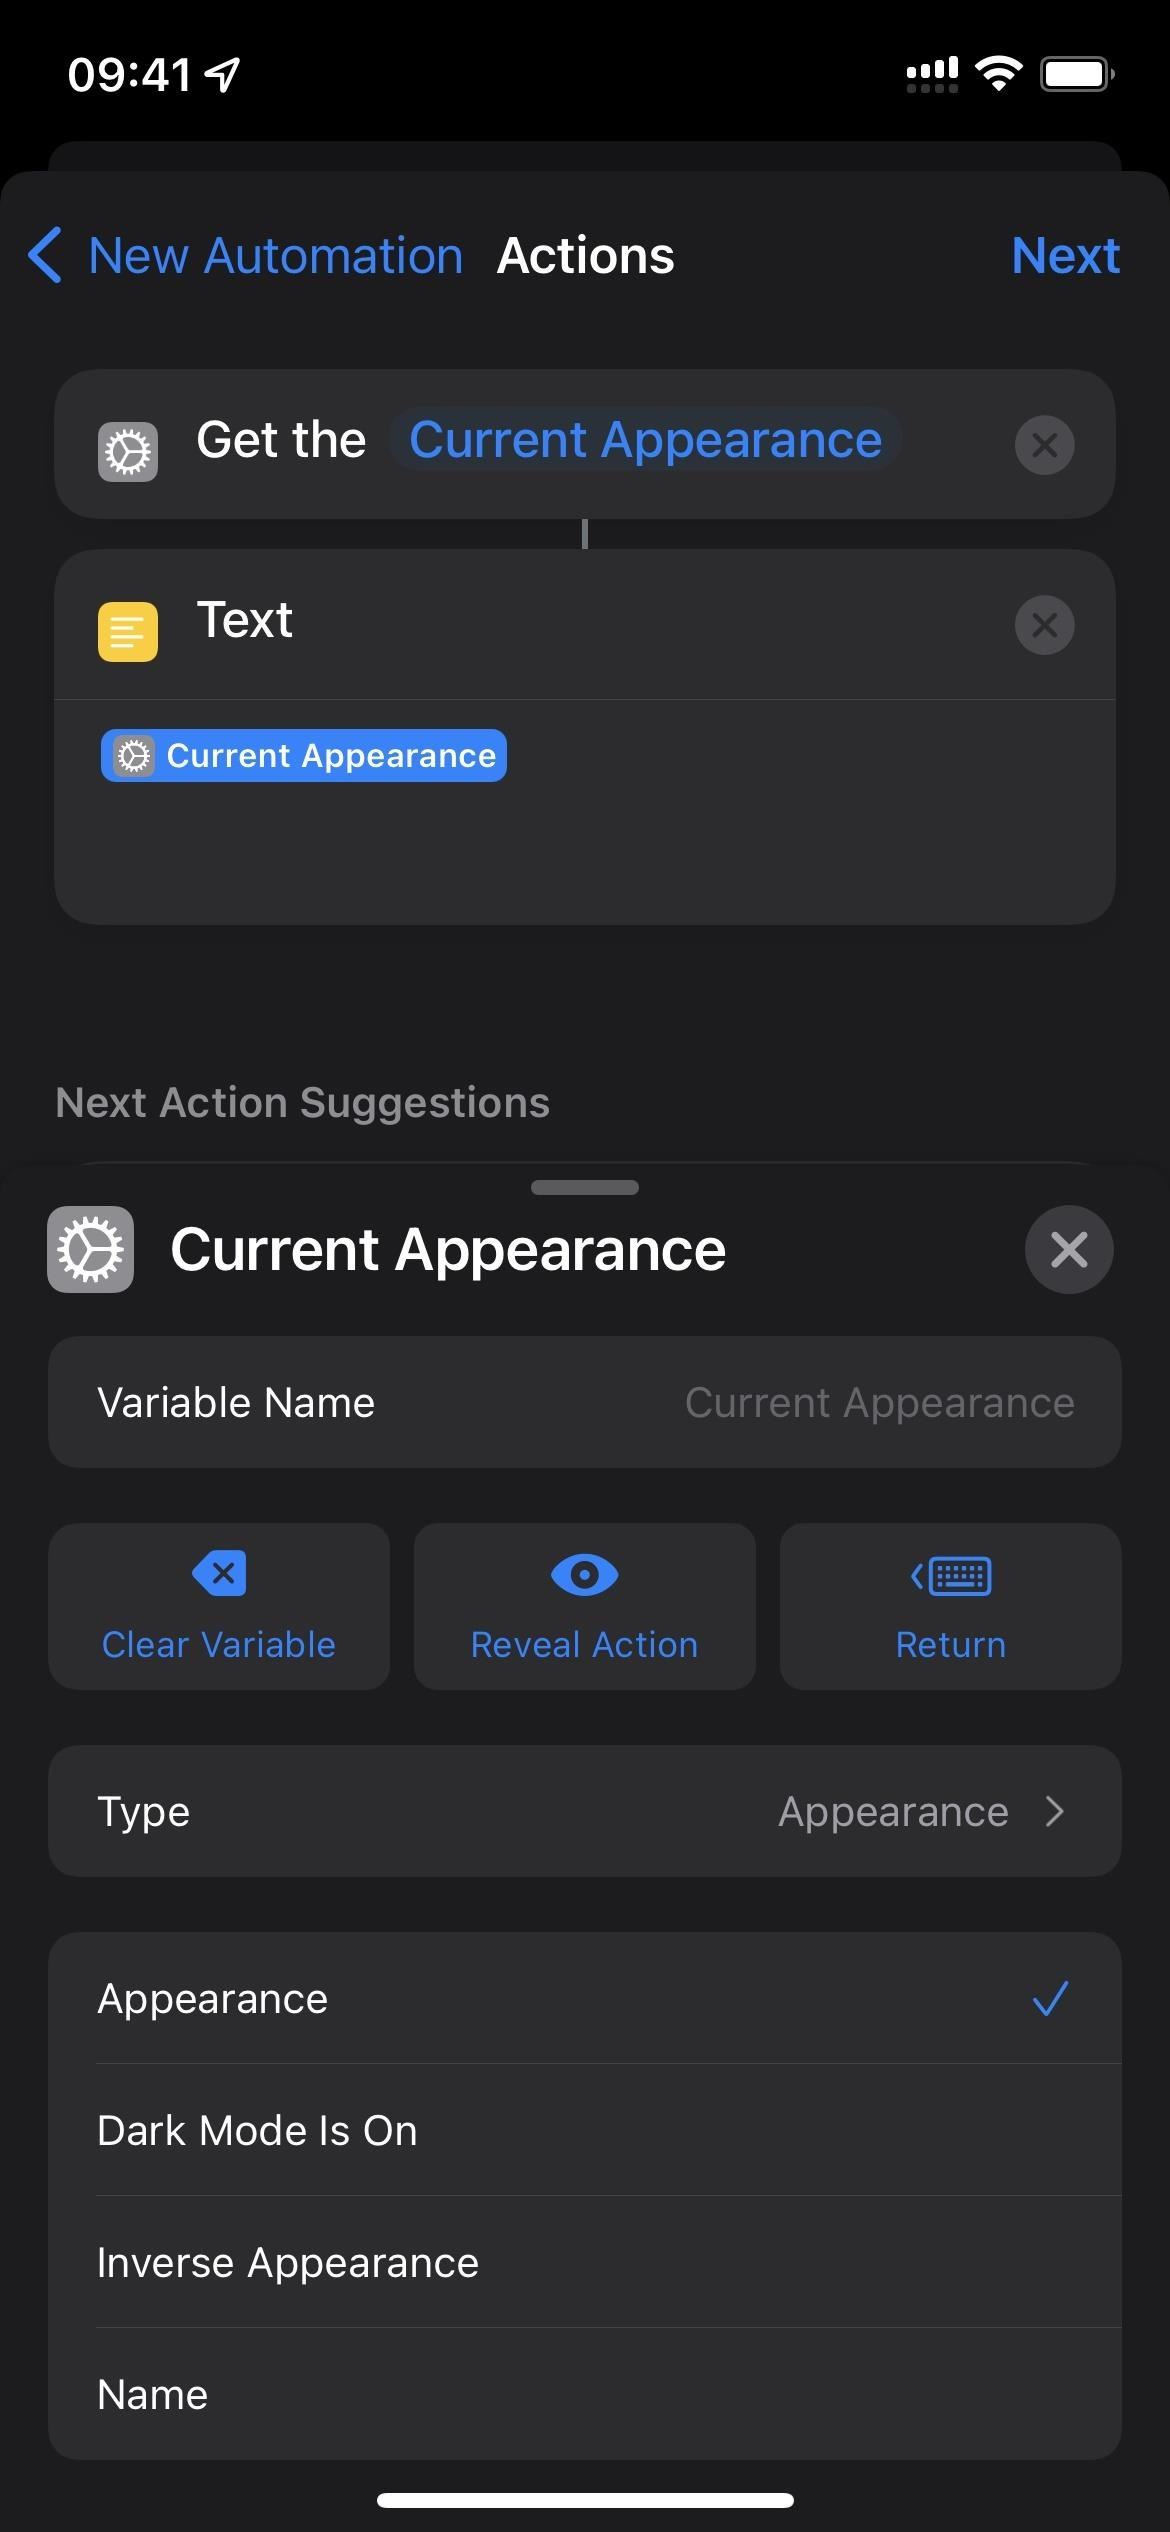 How to Set Apps to Always Use Dark or Light Mode on Your iPhone — Without Affecting the System-Wide Appearance